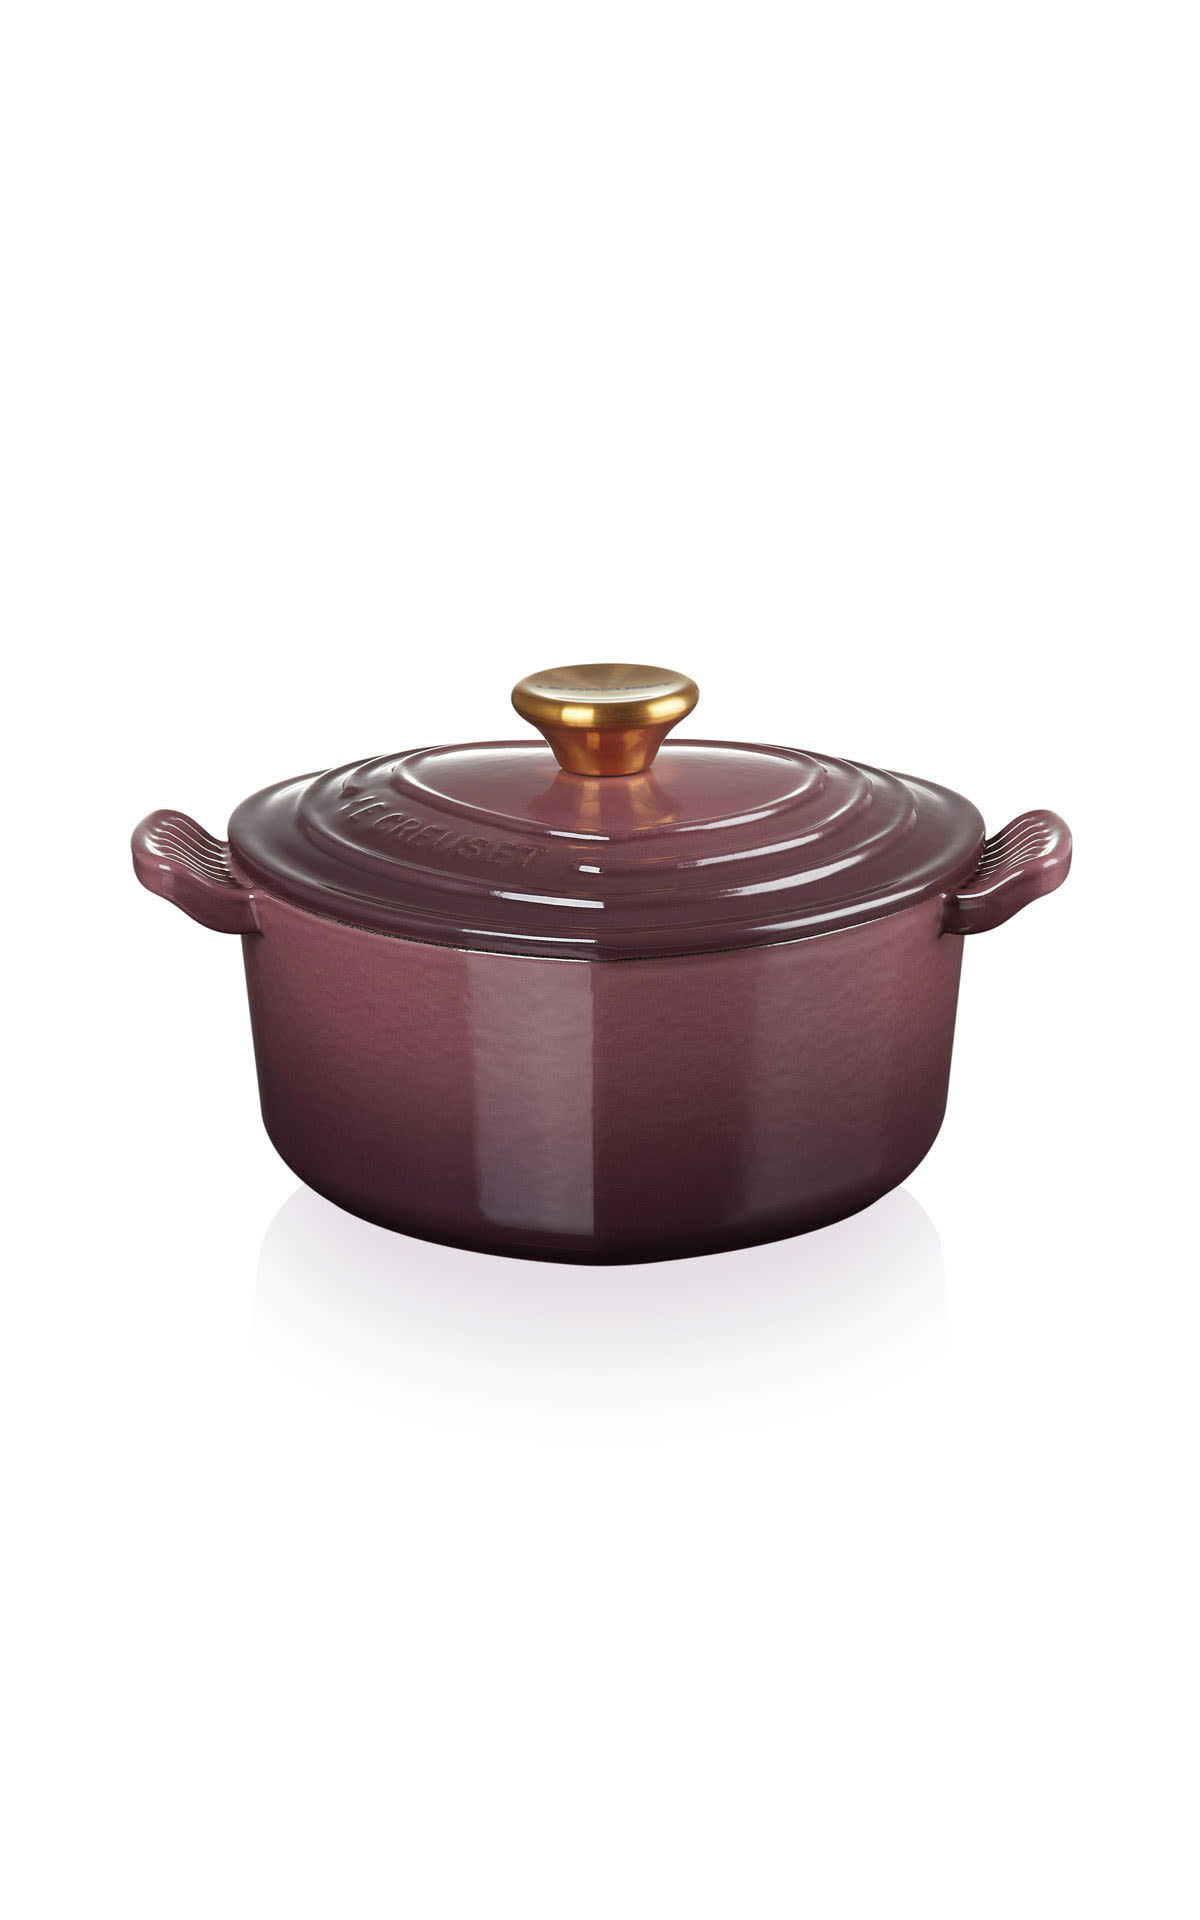 Le Creuset 20cm heart casserole fig from Bicester Village